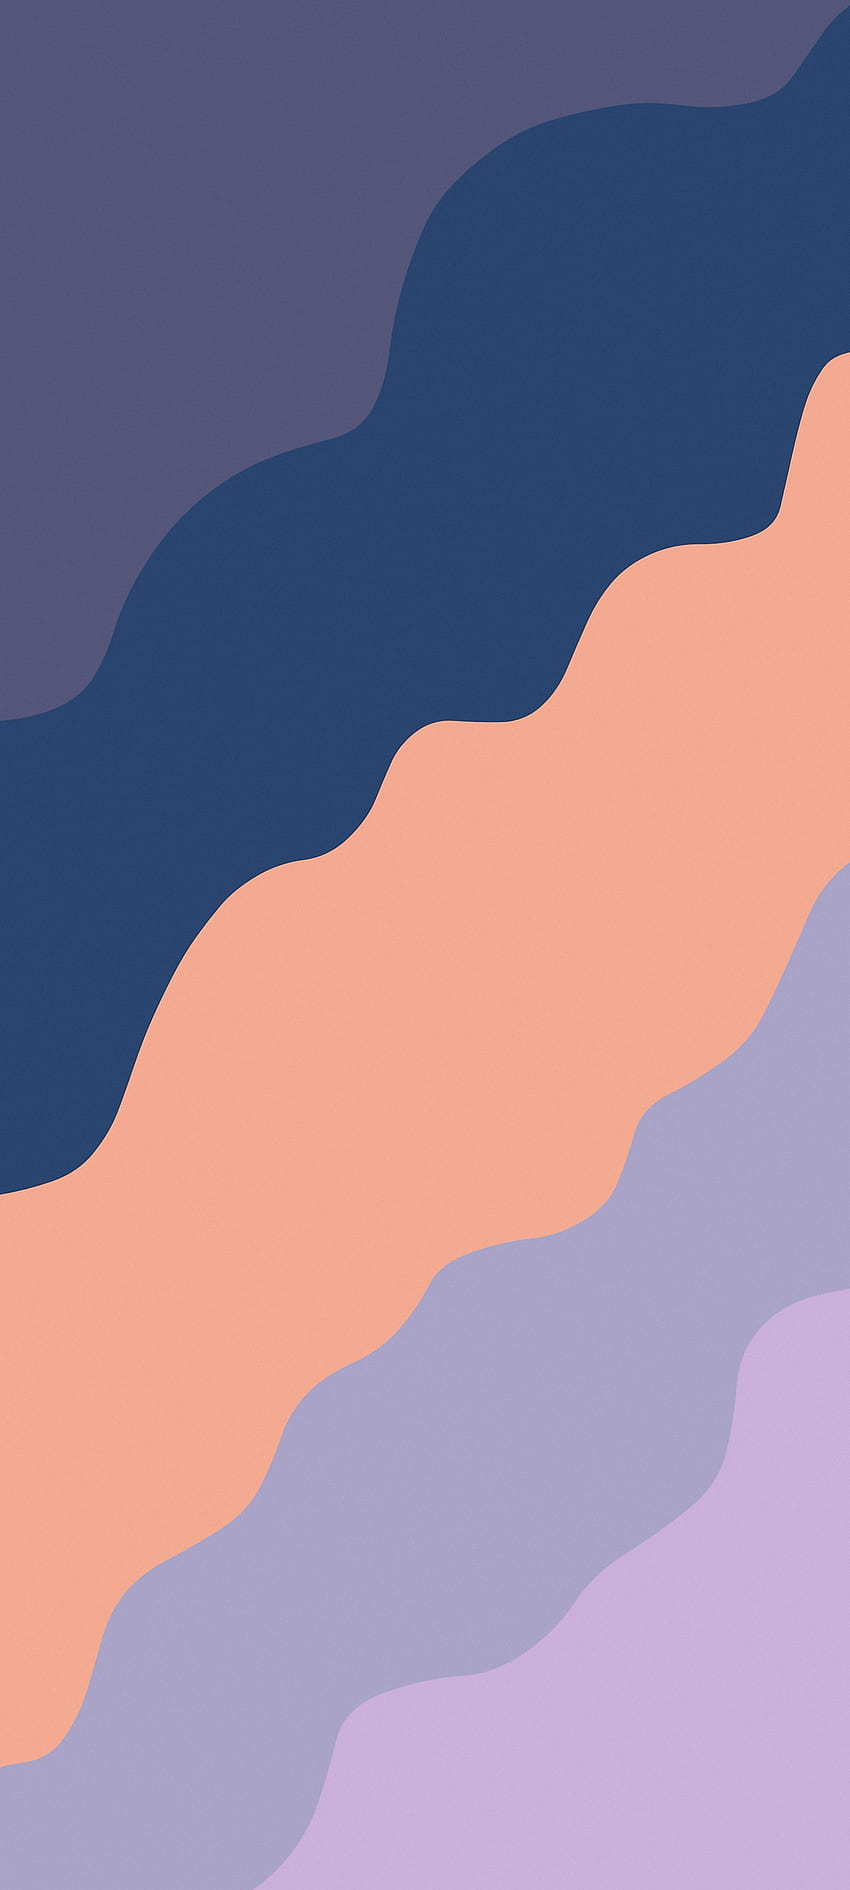 Section colors, waves, desing, minimalist, abstract, inspired HD phone wallpaper